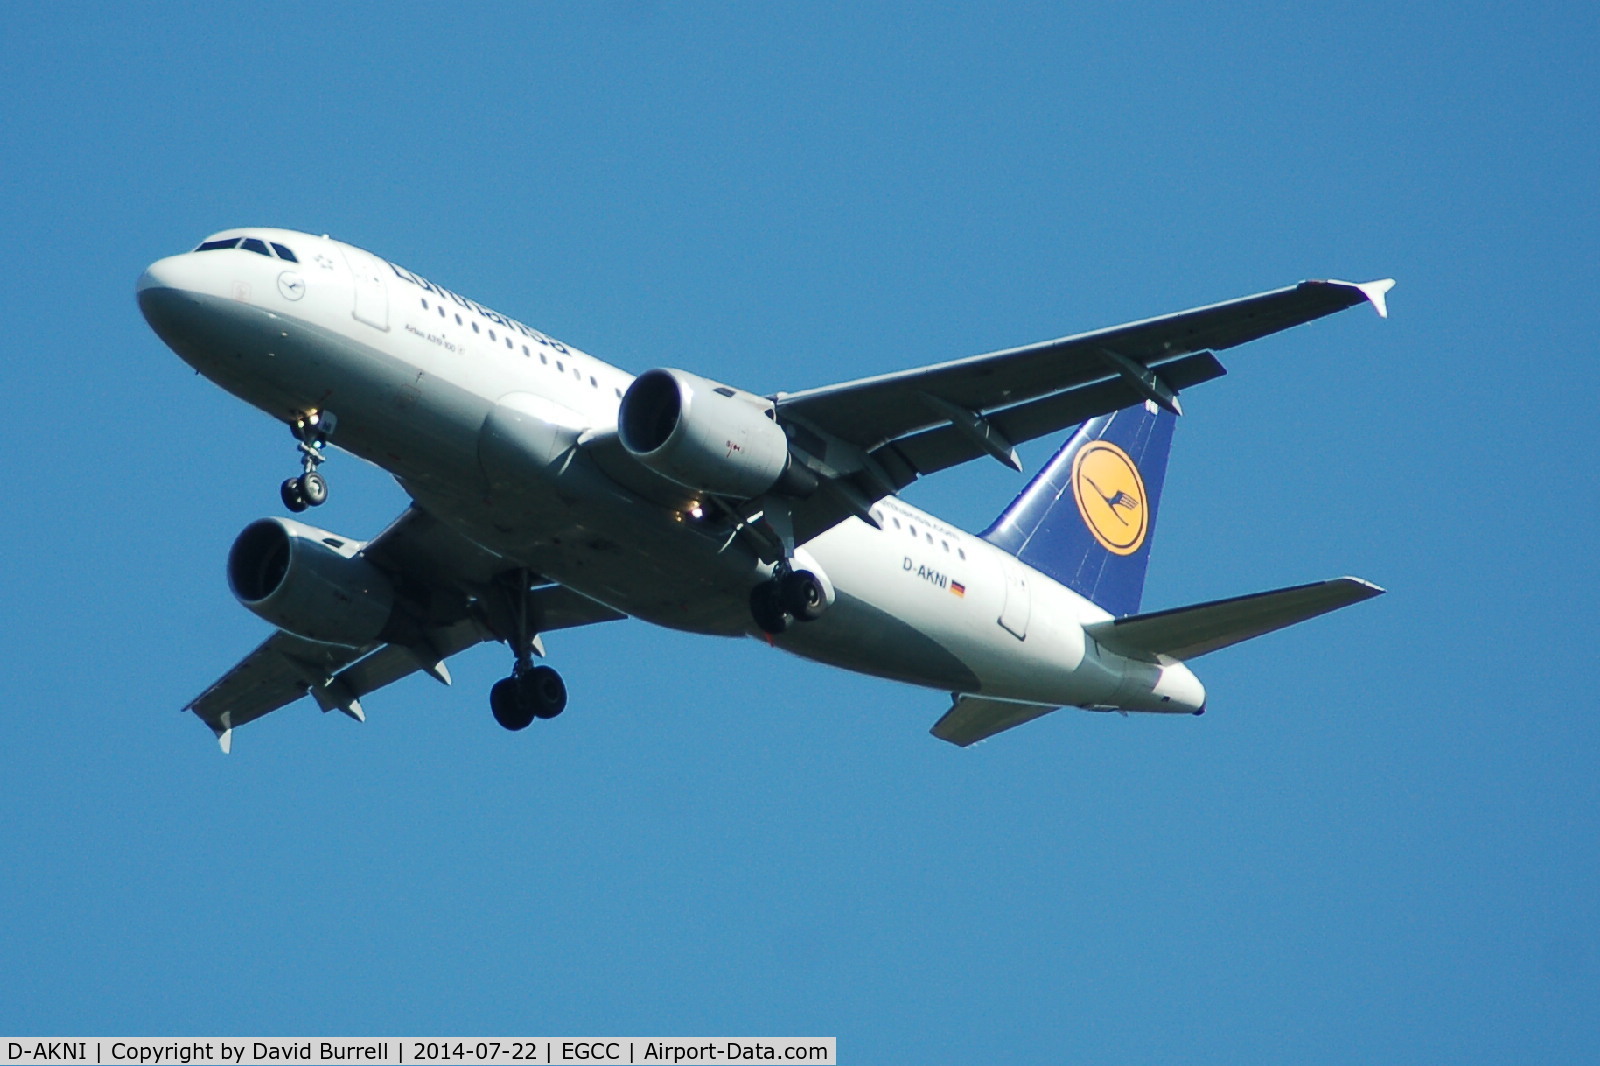 D-AKNI, 1999 Airbus A319-112 C/N 1016, Lufthansa Airbus A319-112 D-AKNI on approach to Manchester Airport.